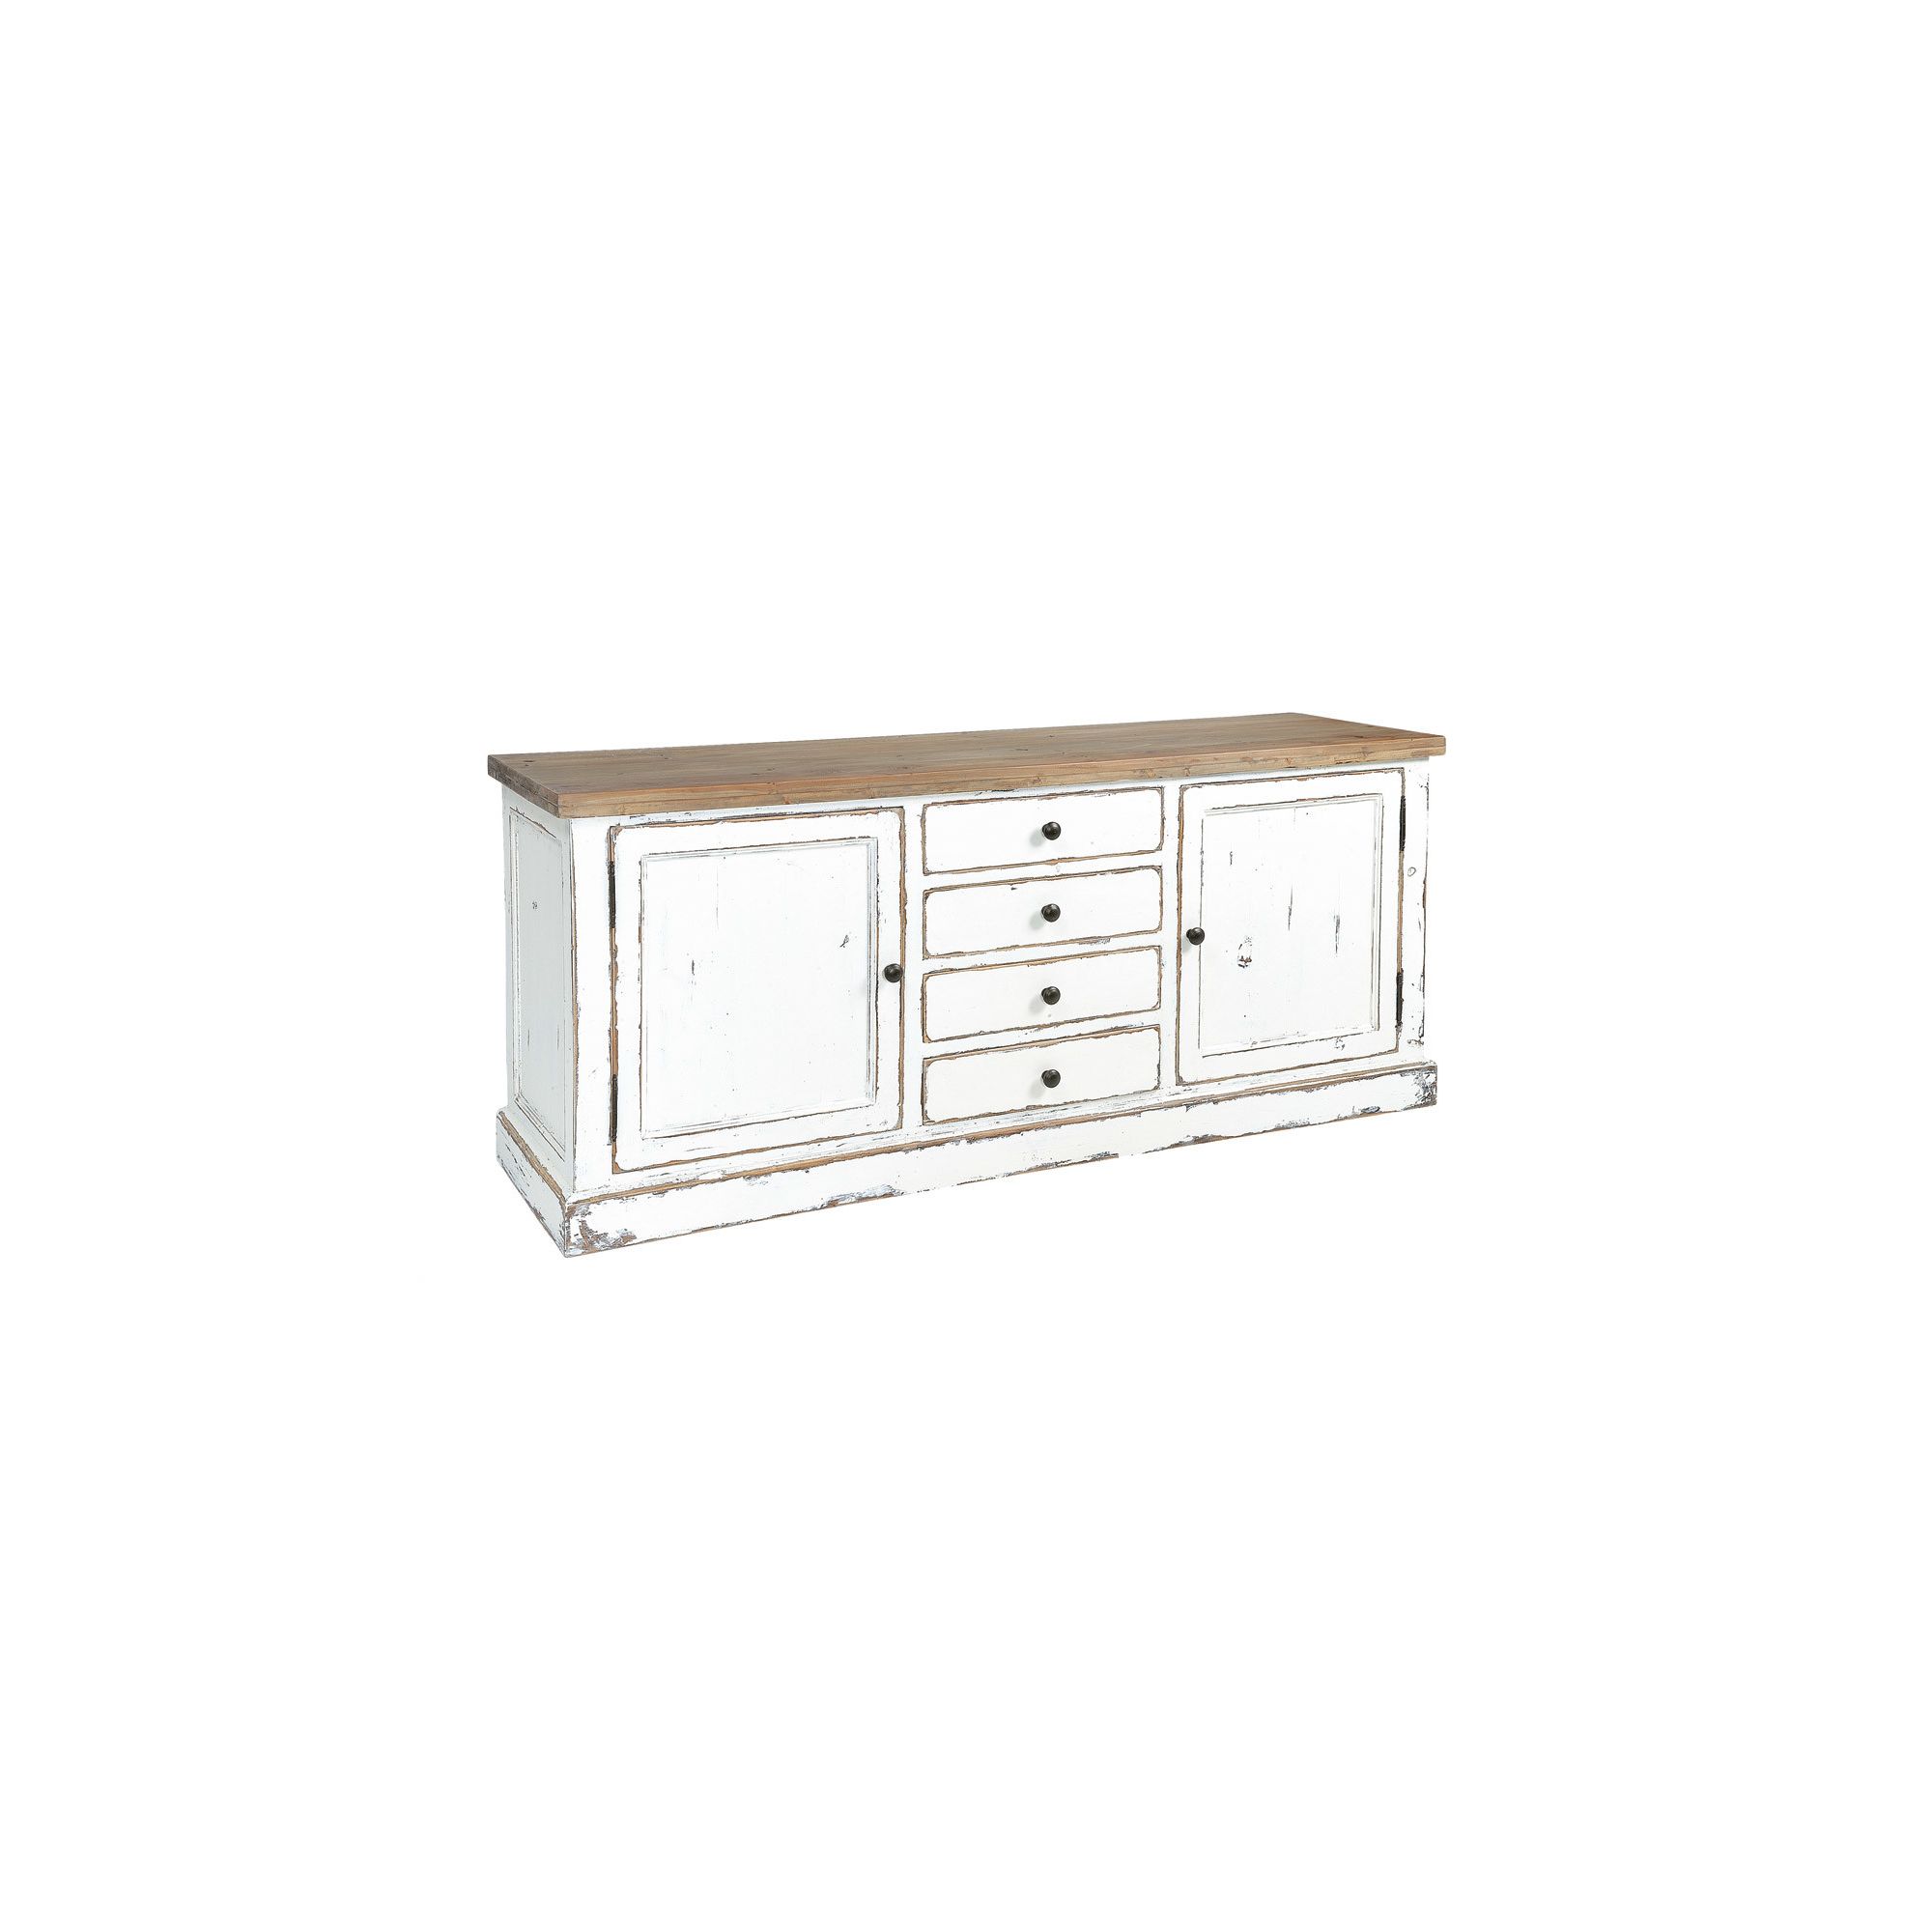 Rowico Aspen Sideboard - White Distress Painted at Tescos Direct